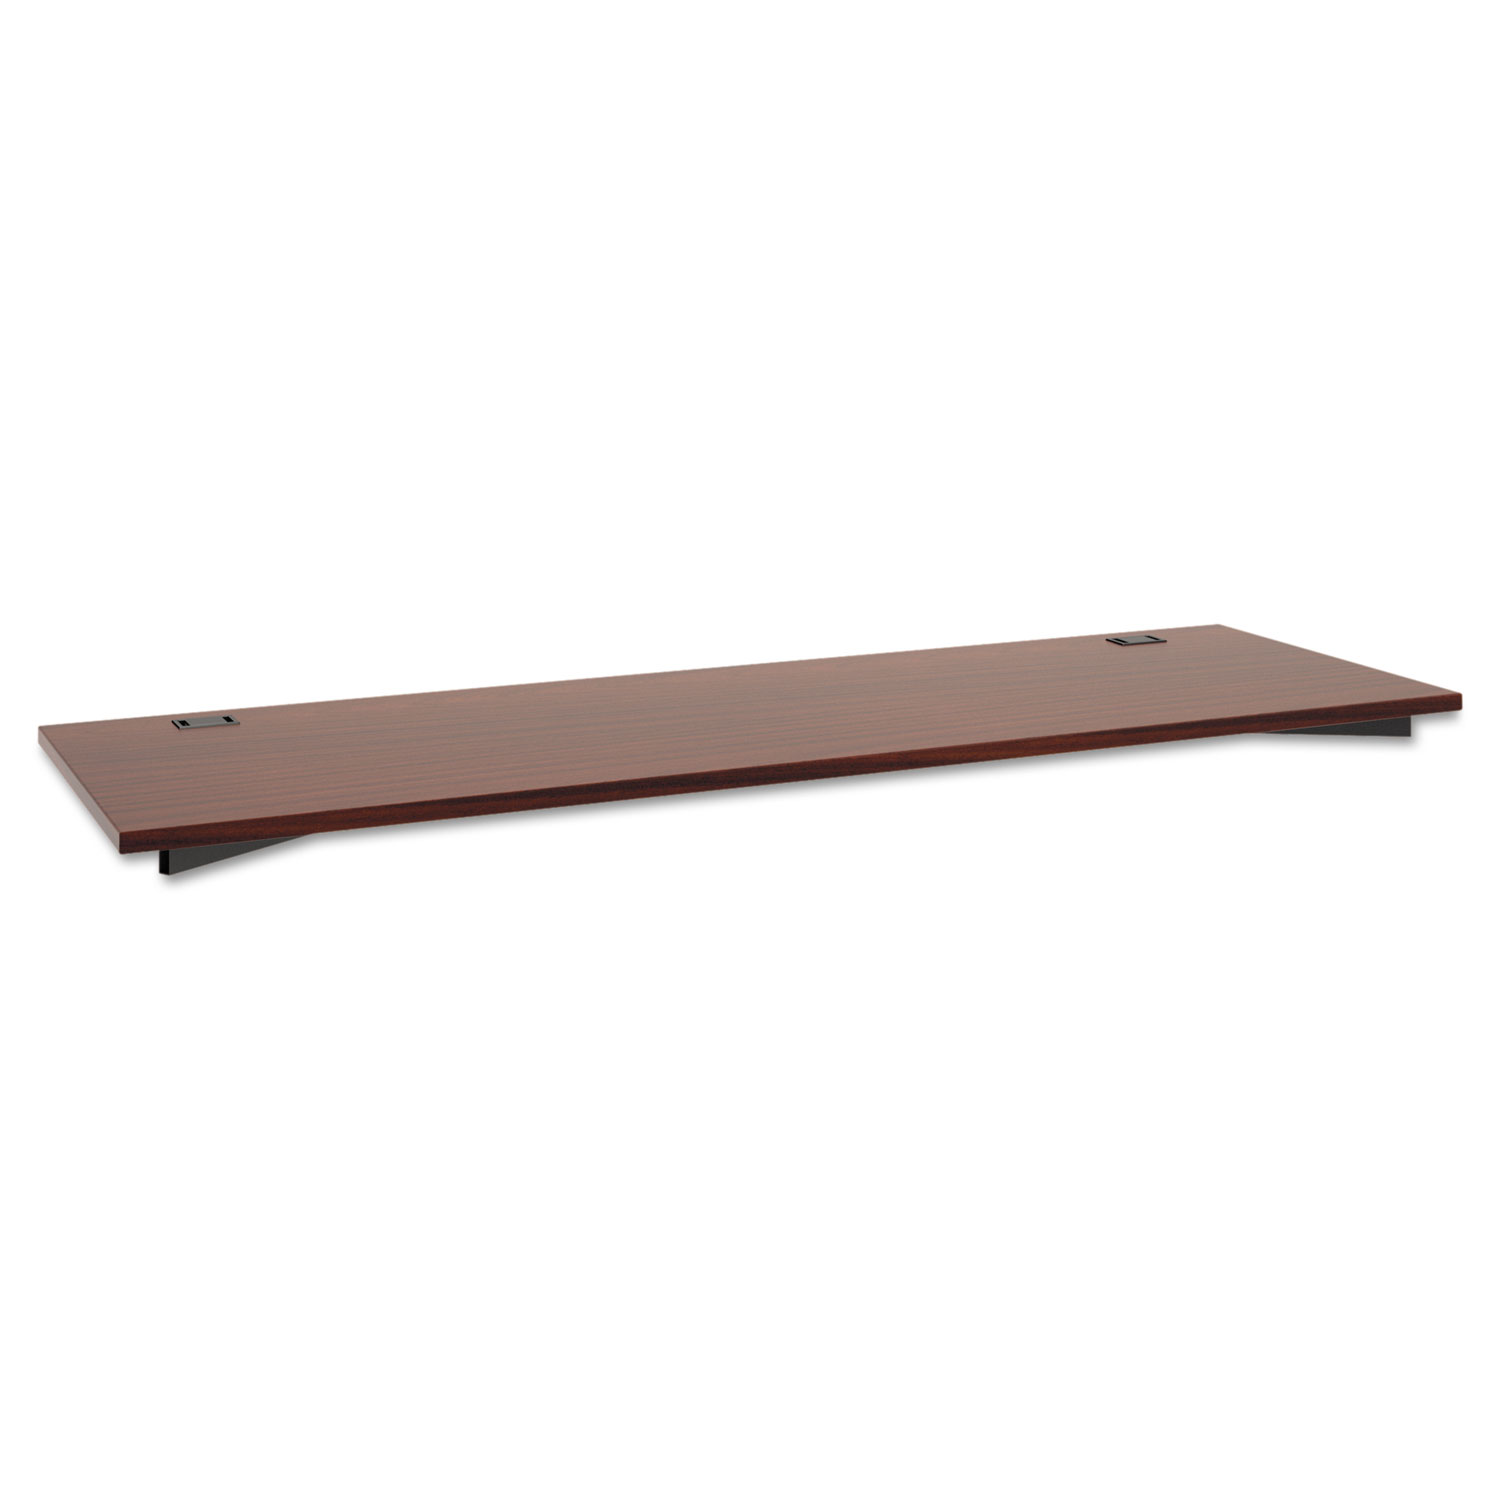 Manage Series Worksurface, Laminate, 72w x 23-1/2d x 1h, Chestnut